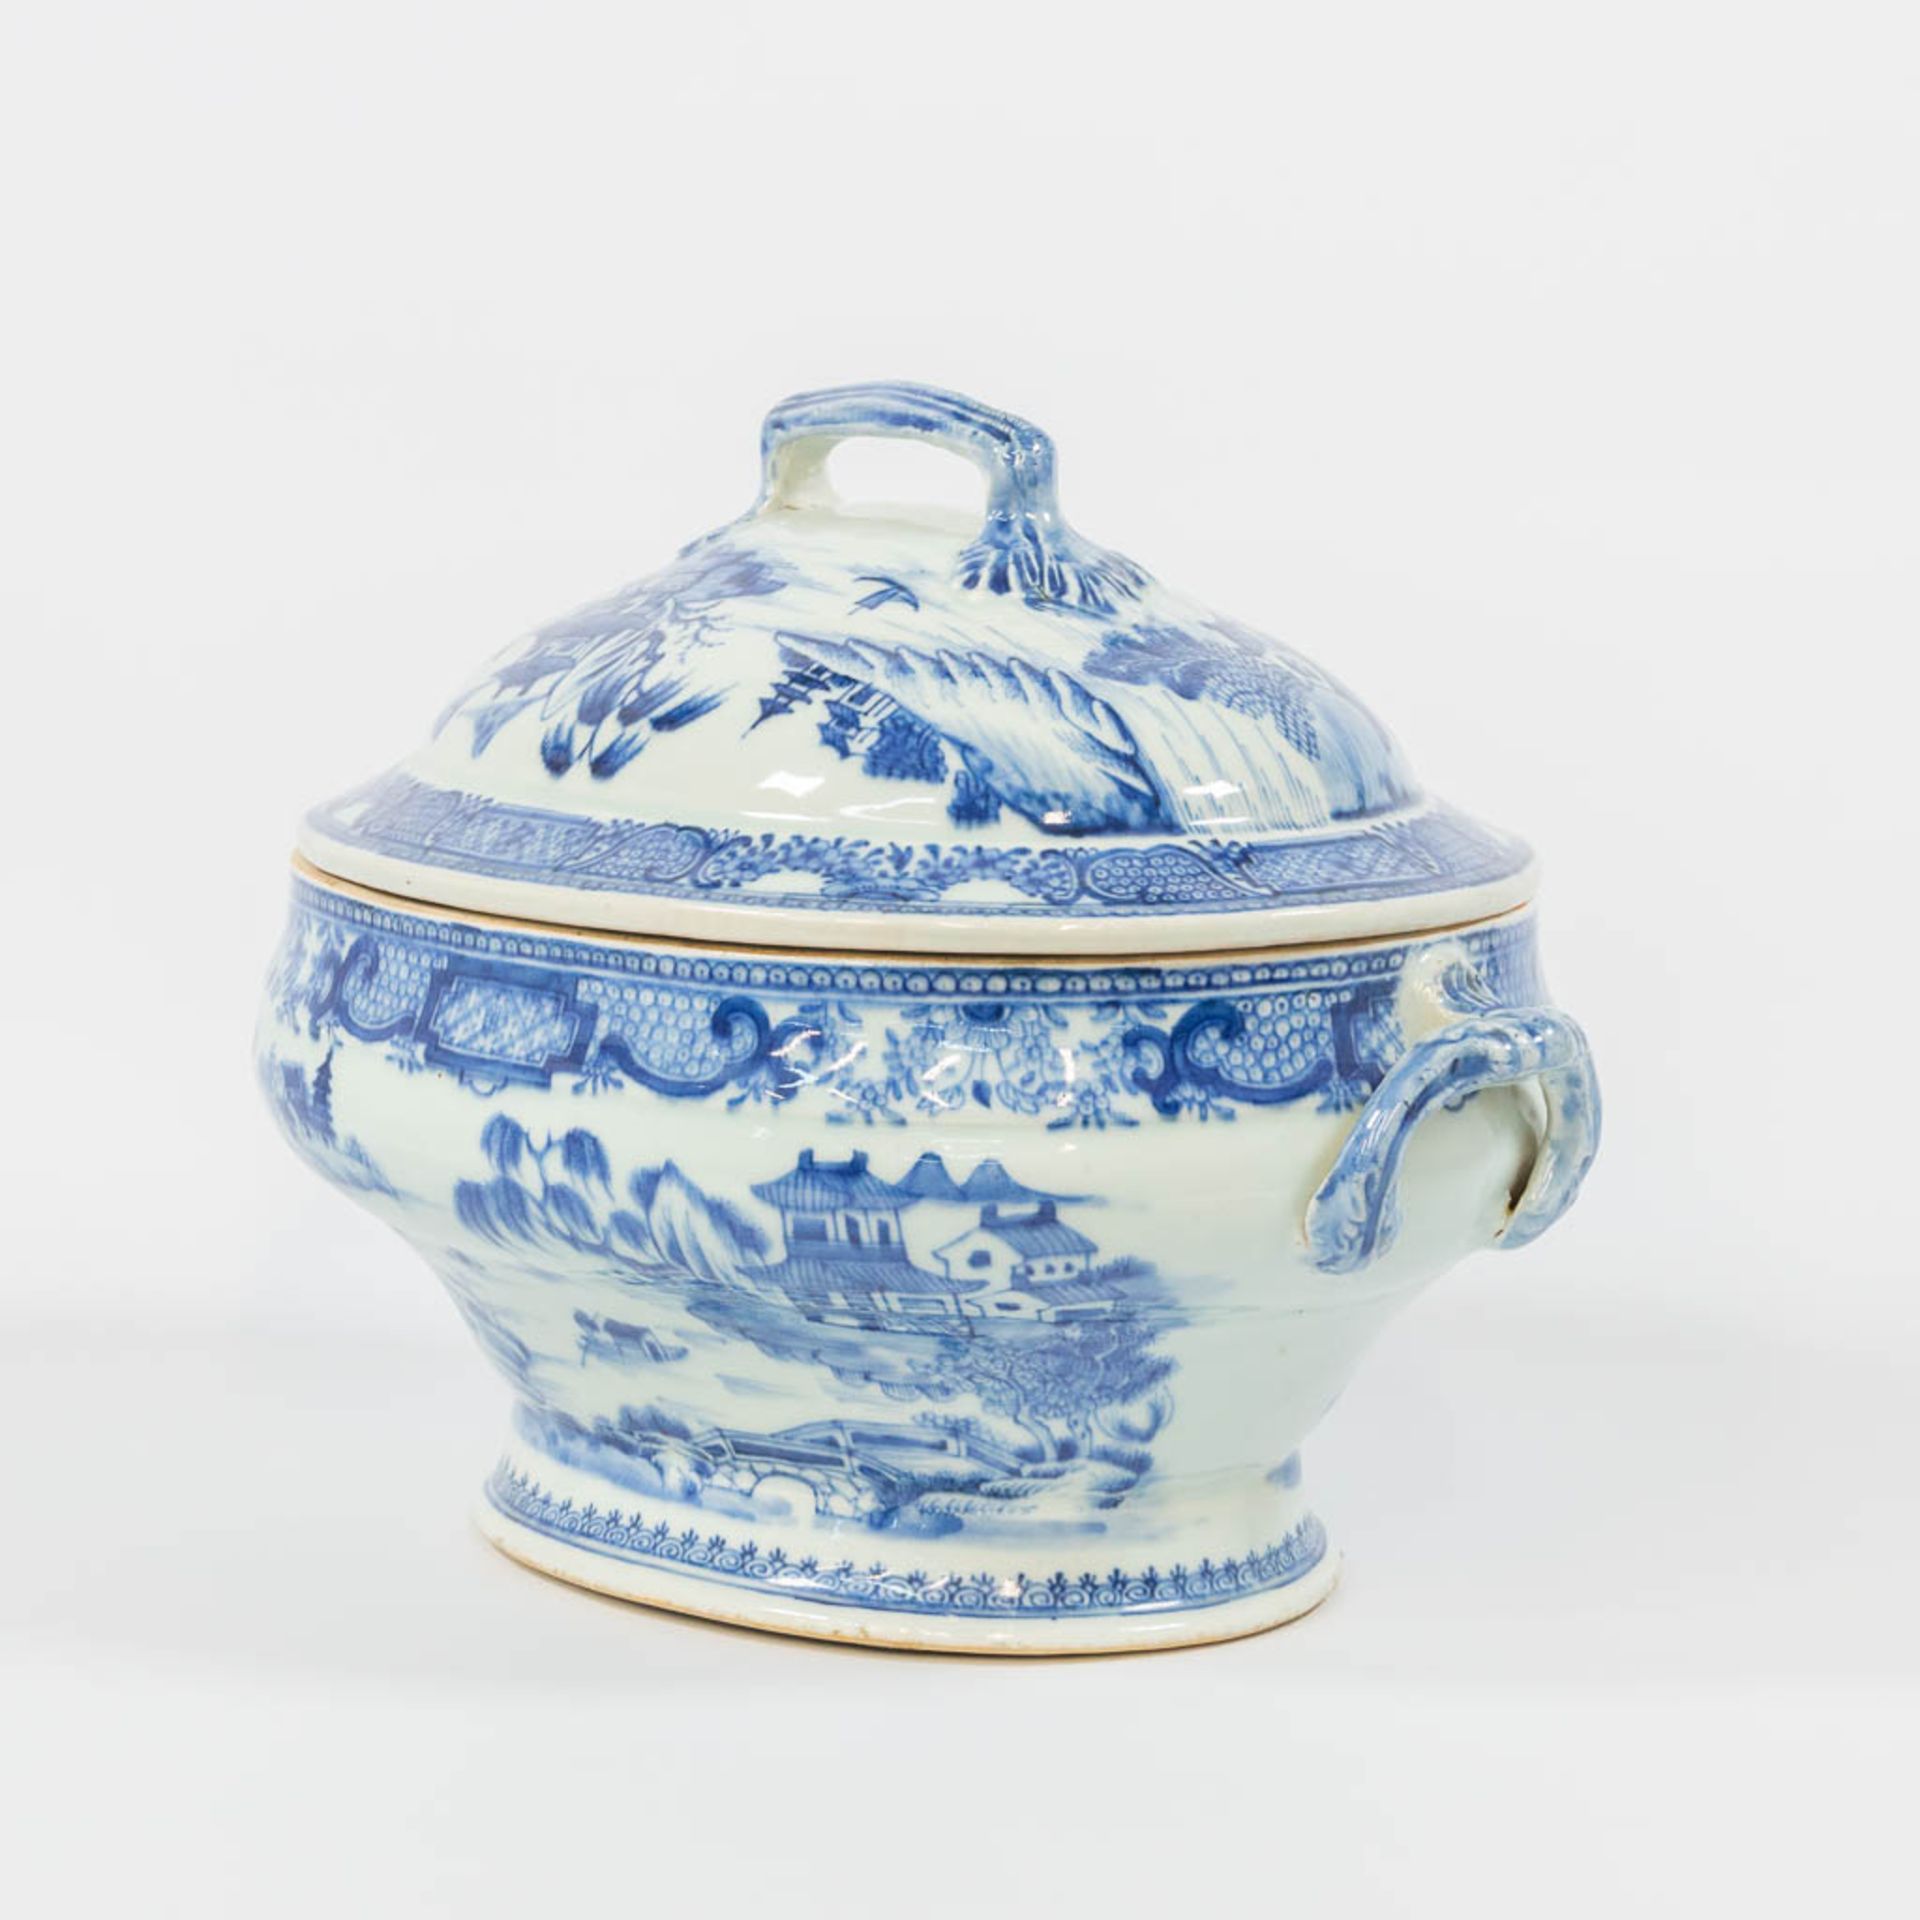 A large Chinese export porcelain blue and white tureen. 19th century. - Image 5 of 17